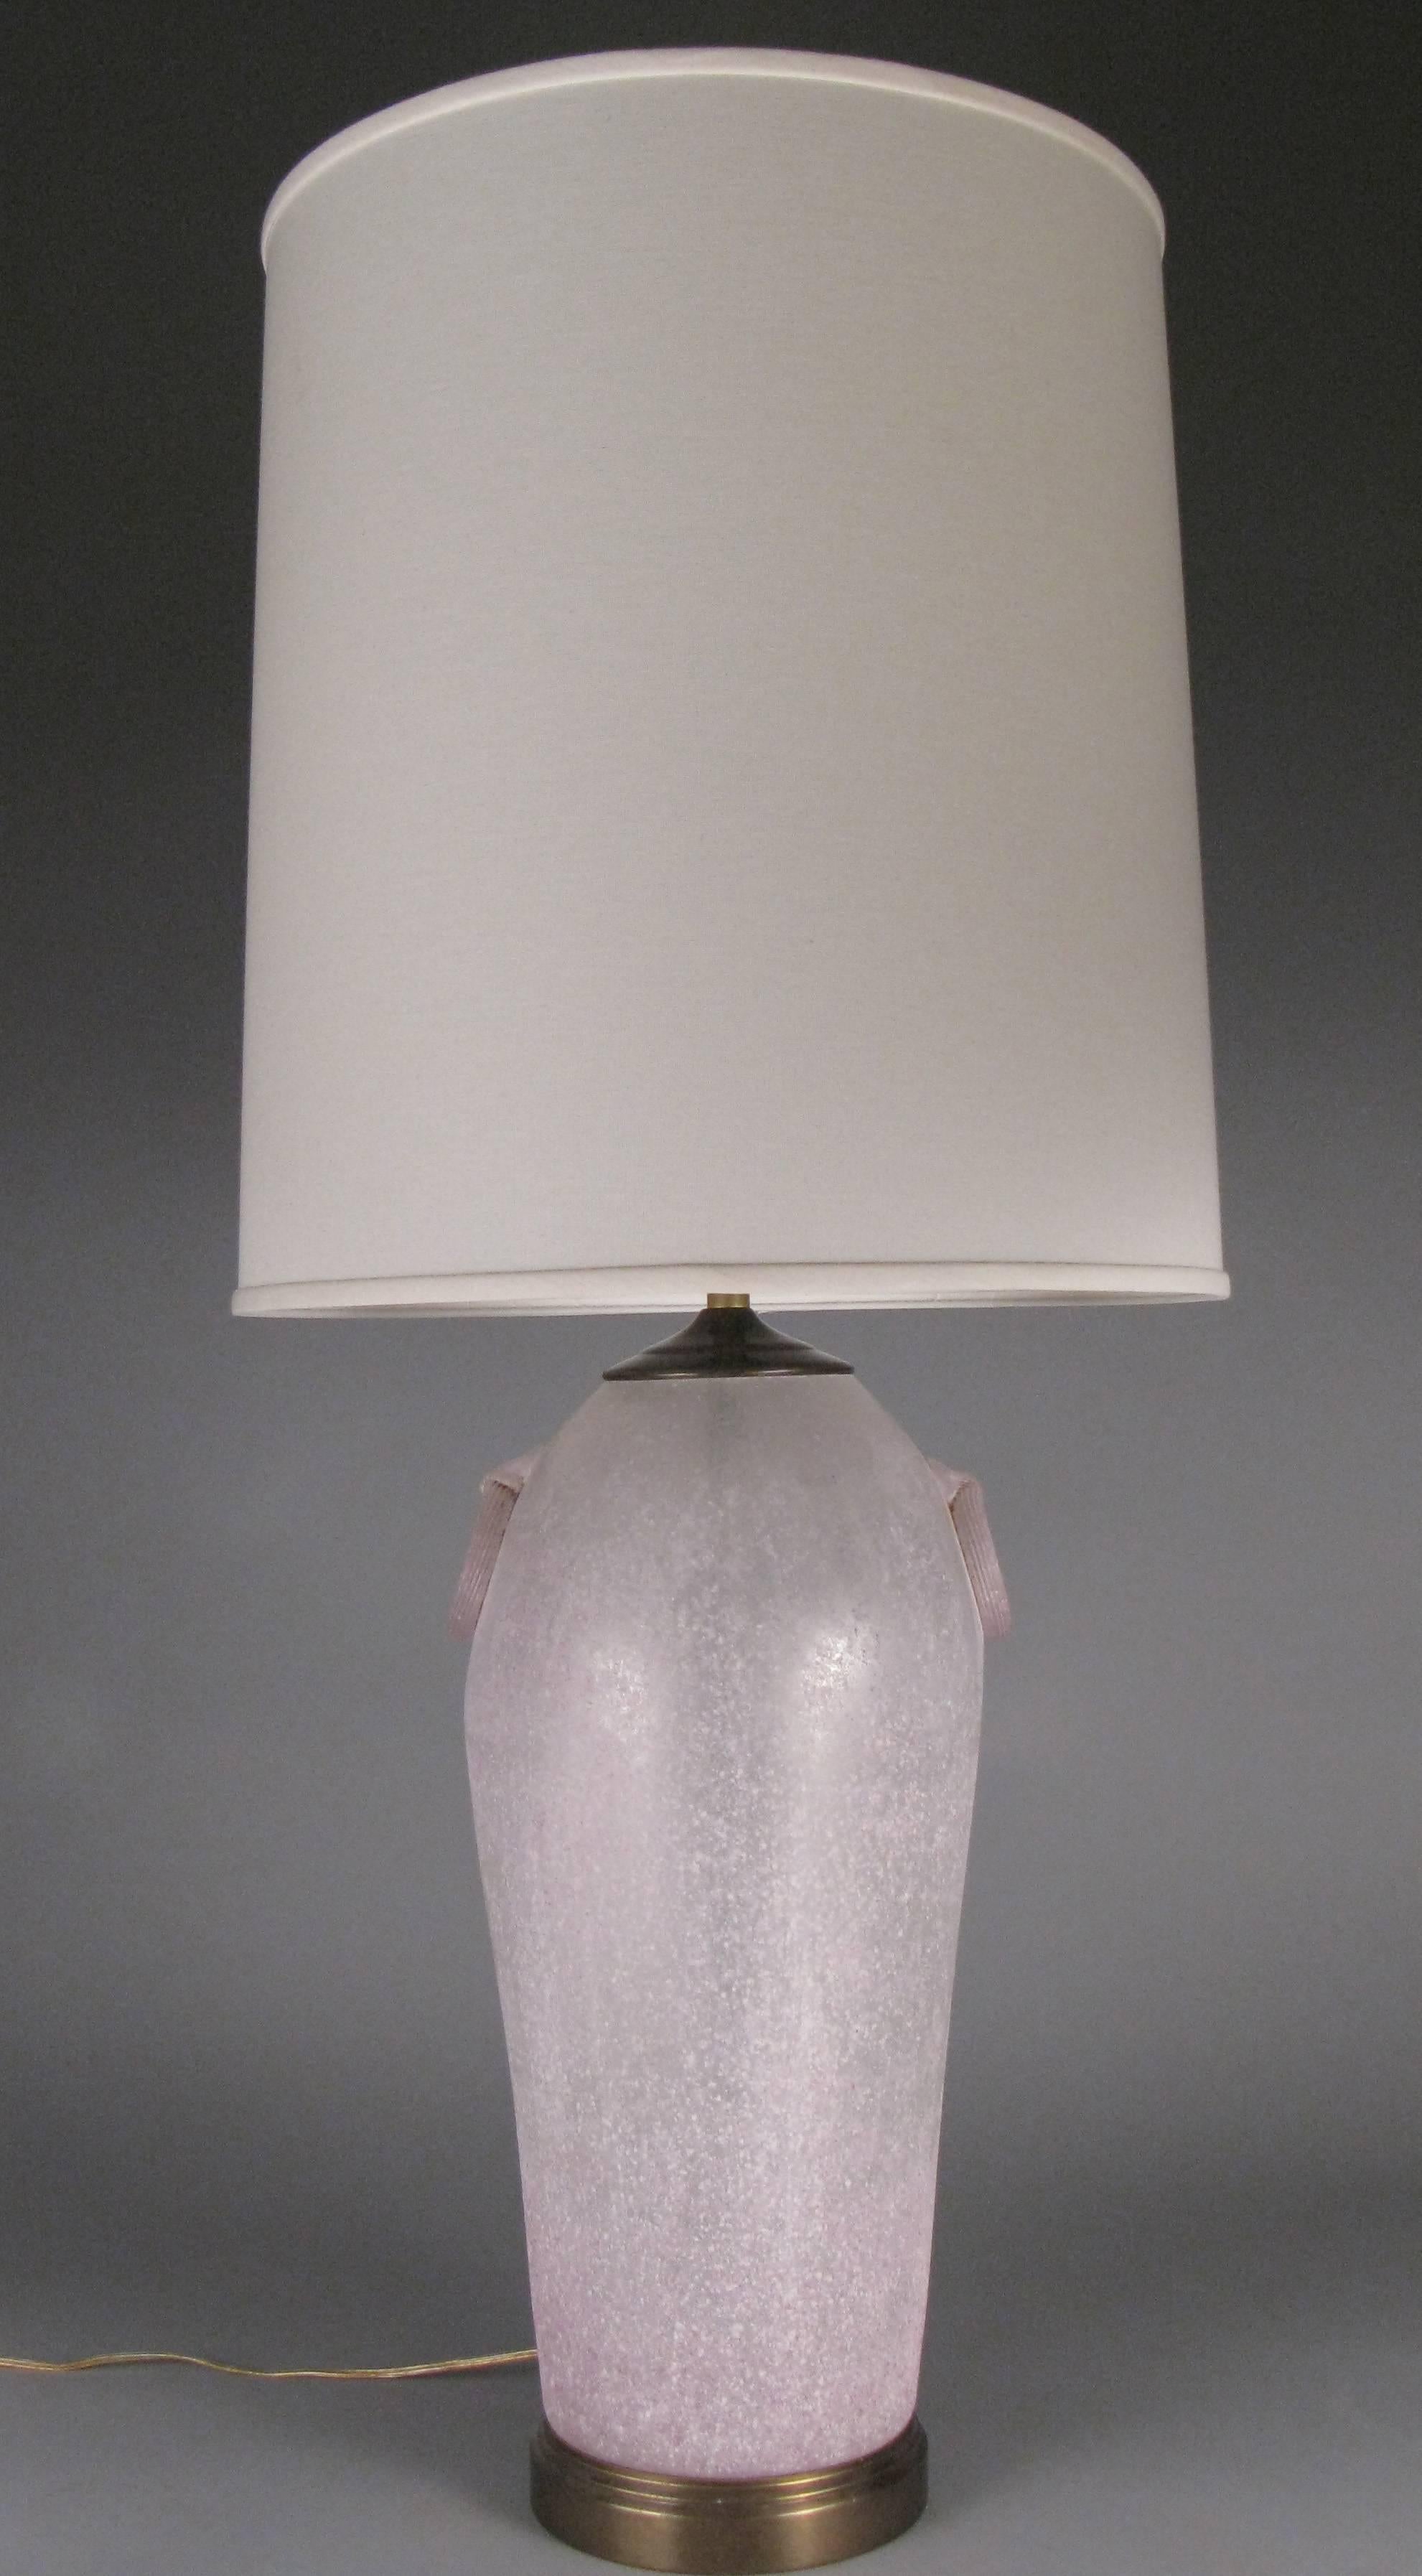 A pair of large-scale vintage 1970s Etruscan style glass lamps by Chapman, with a light pink/lavender dappled matte finish. Very nice design and quality and mint condition. Shades not included. 

Dimensions are: 23